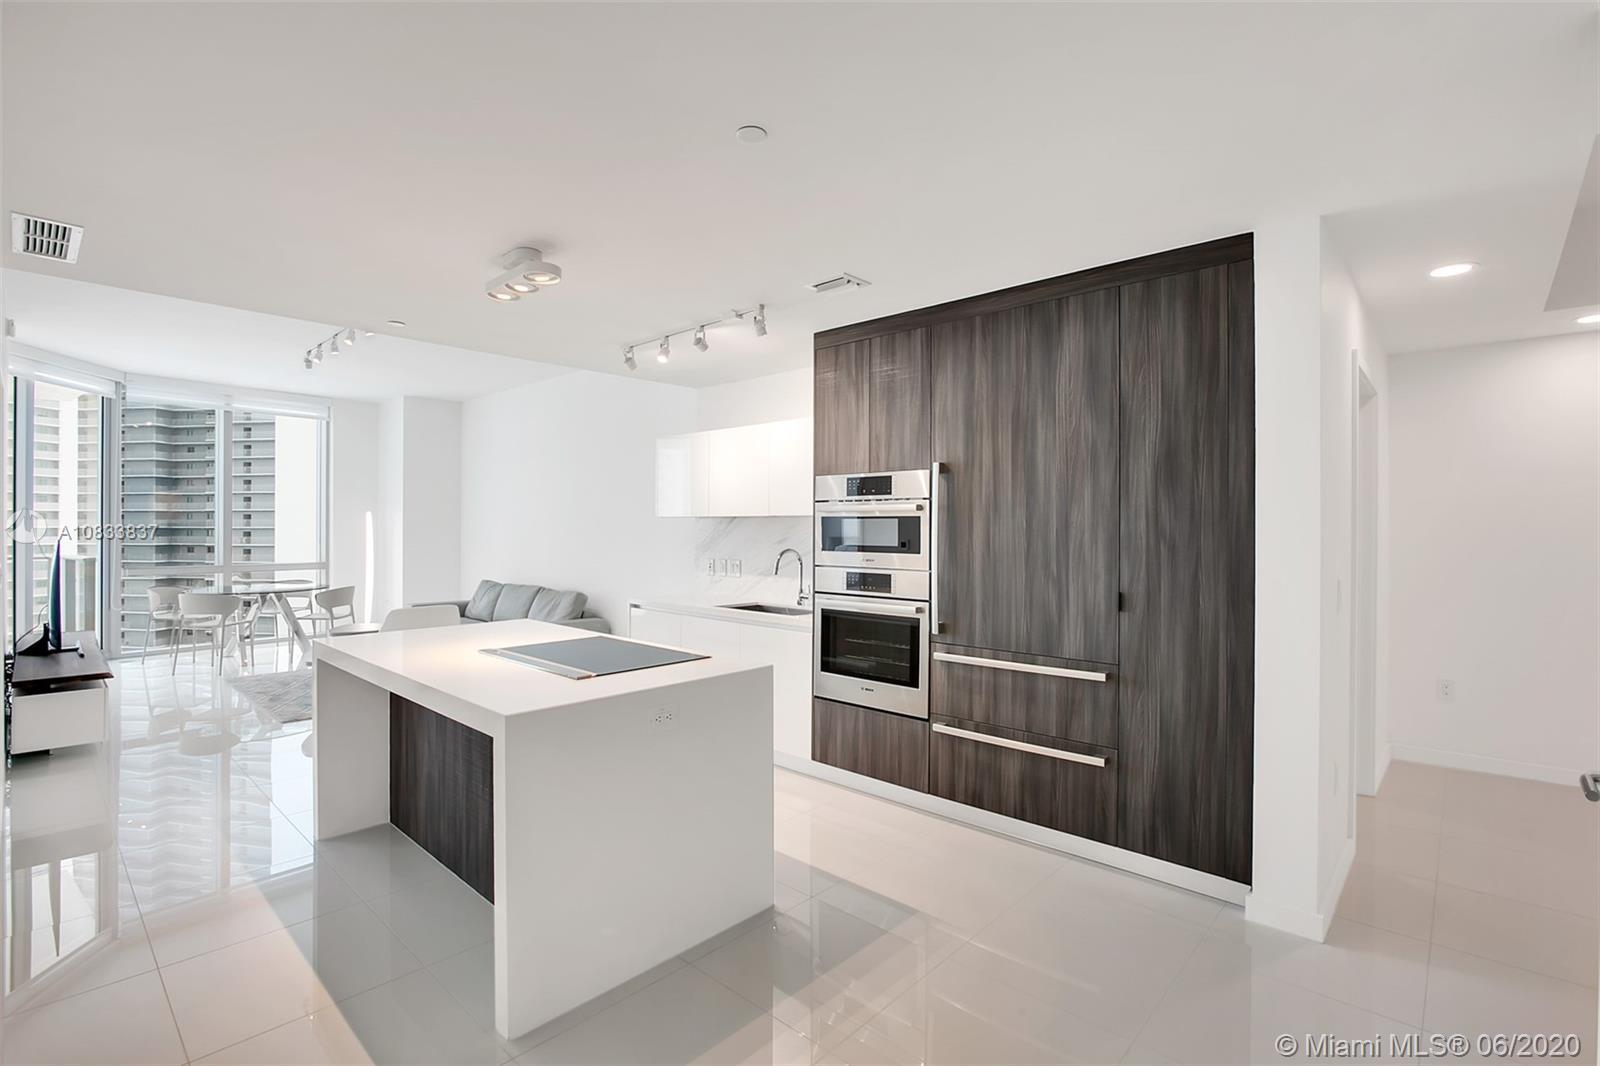 NEW! NEW! BRAND NEW STUNNING MODERN DESIGNER DECORATED & FURNISHED RESIDENCE IN BRAND NEW BUILDING. 